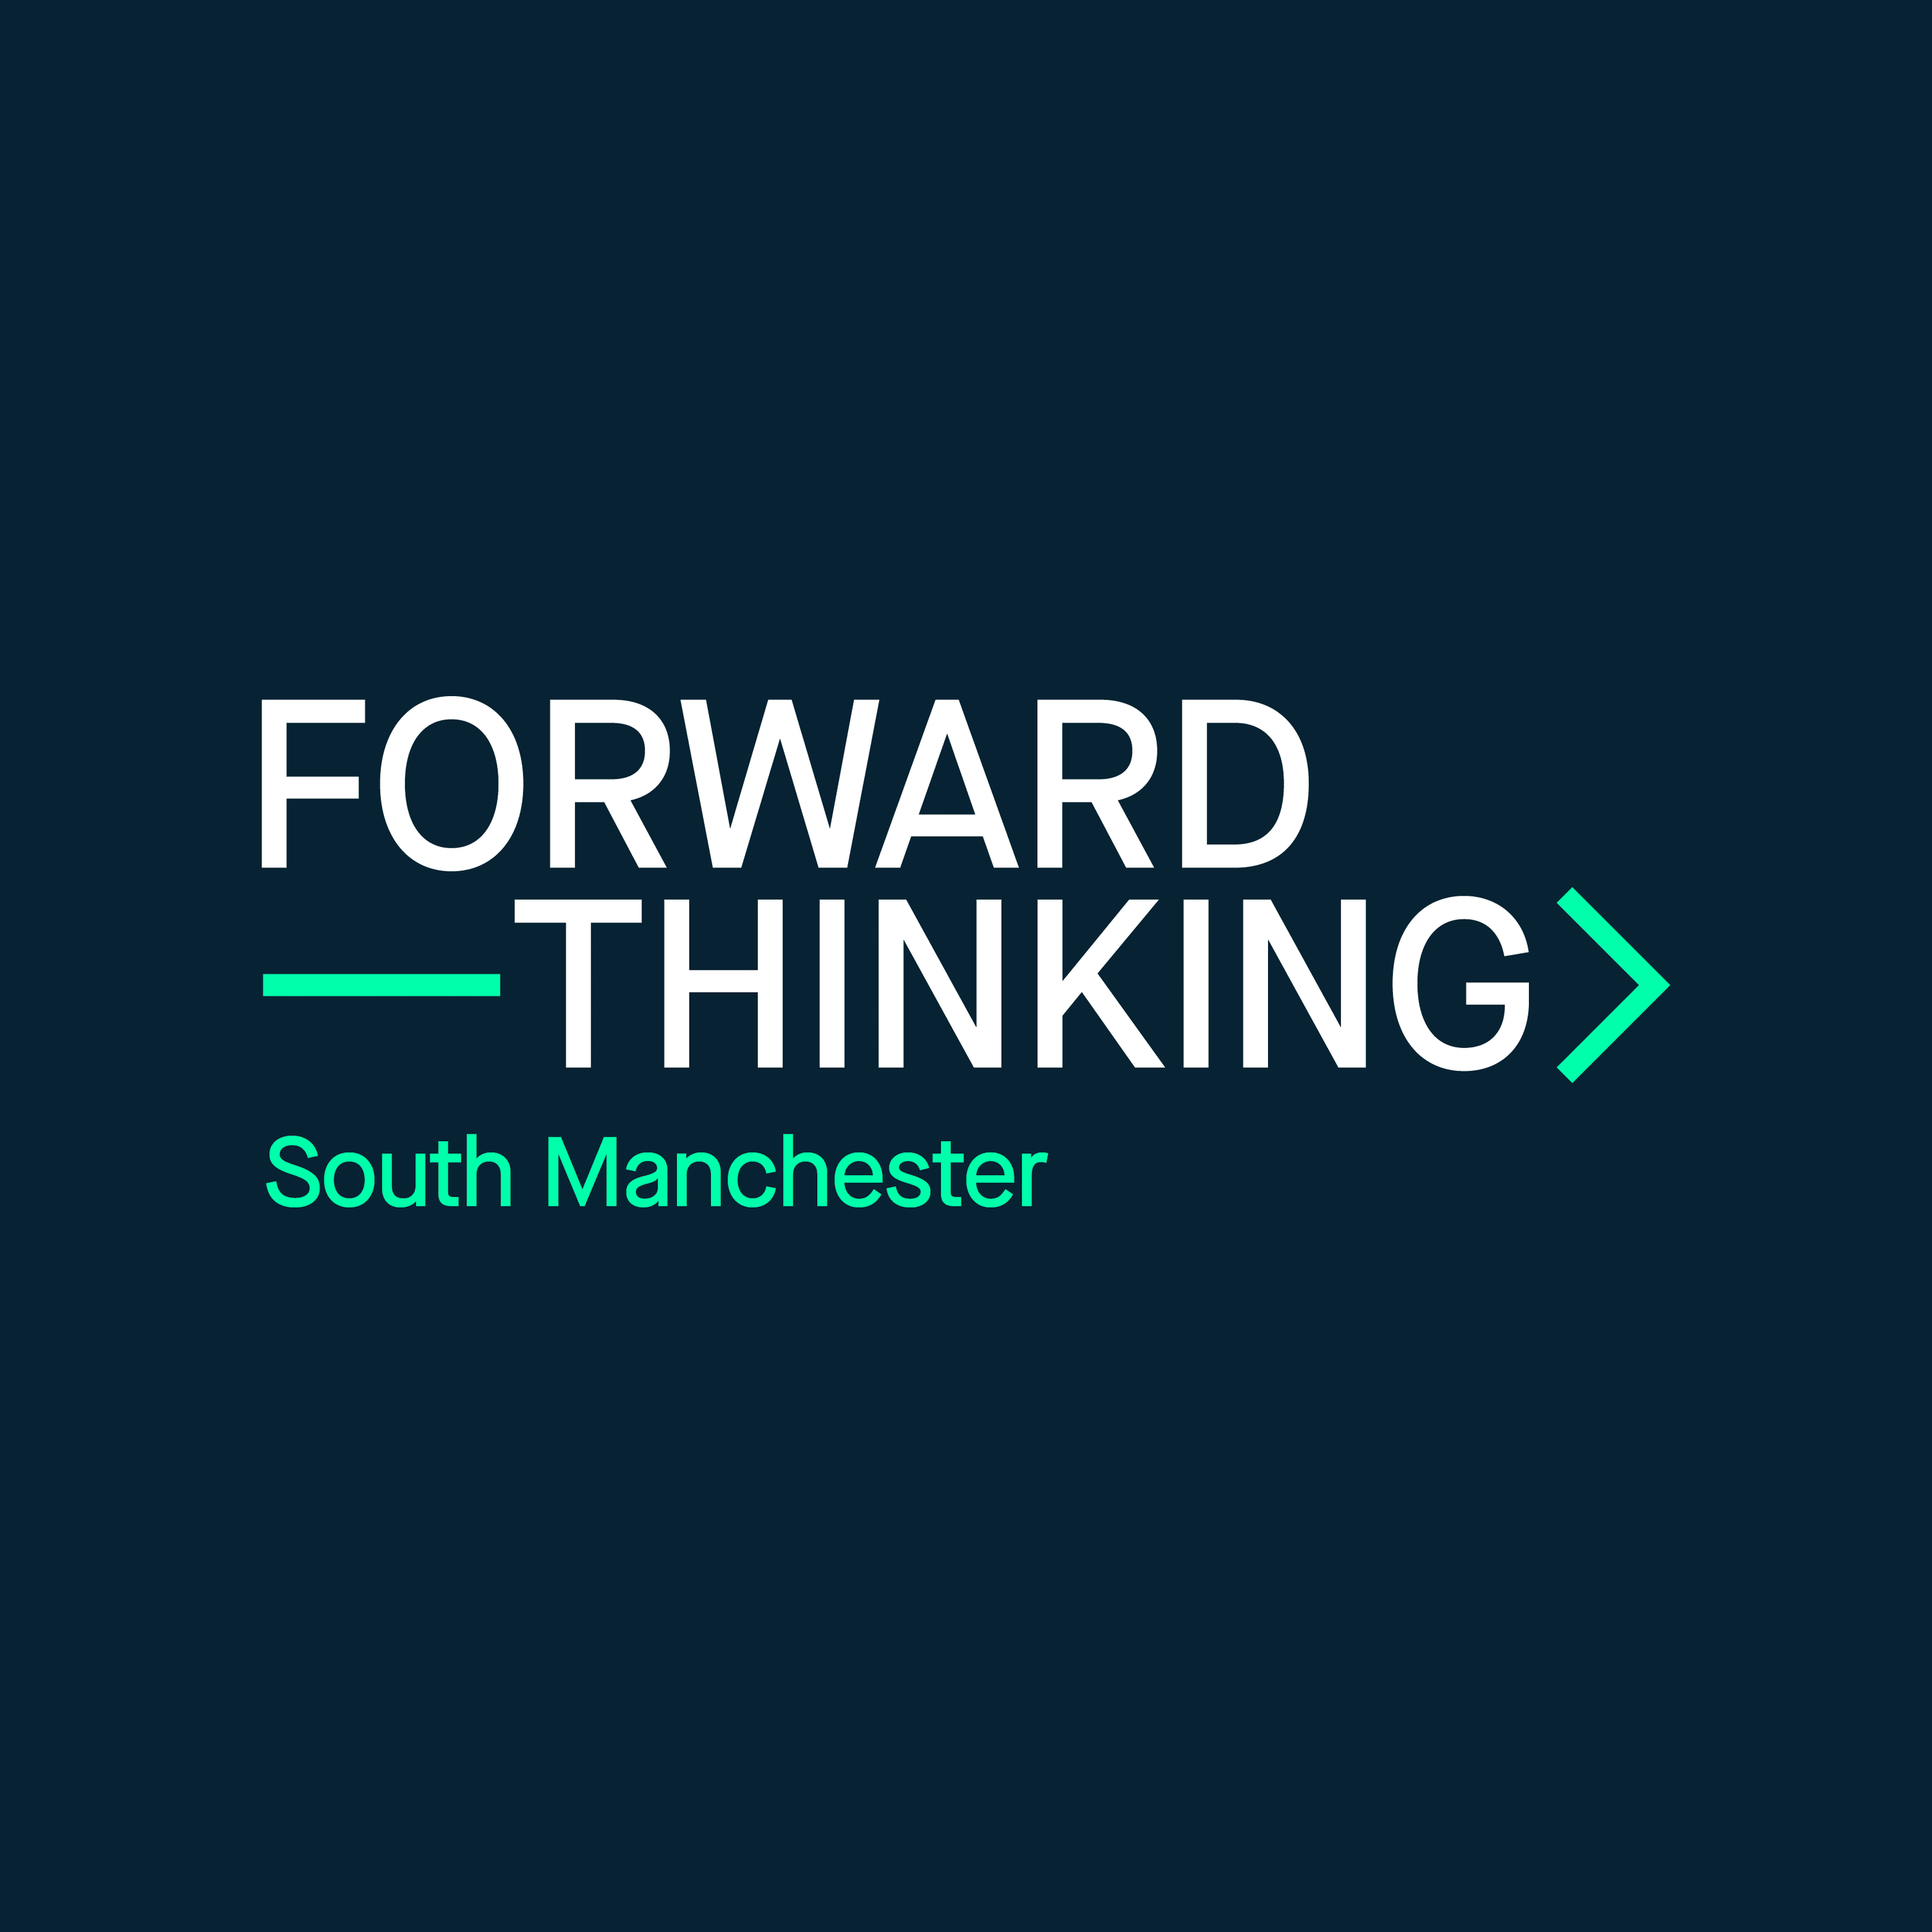 Forward Thinking - South Manchester